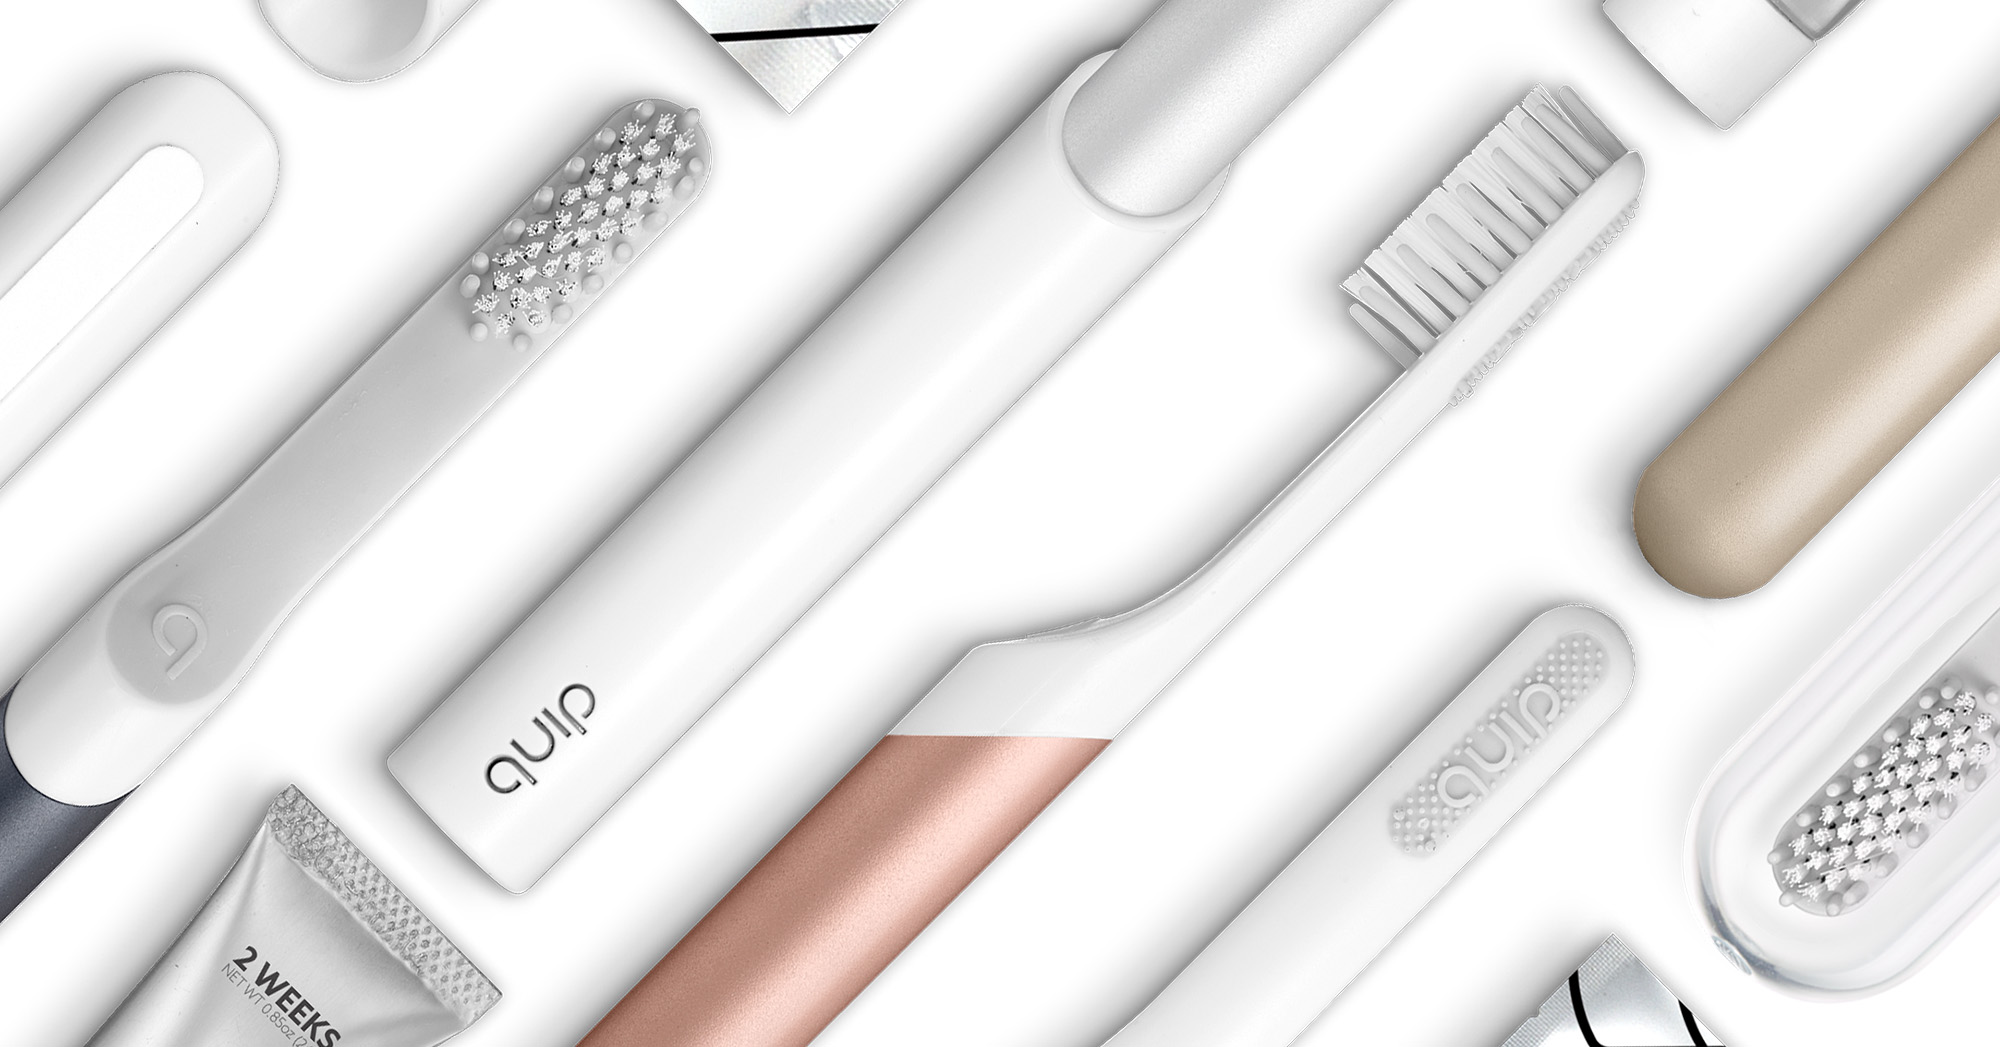 What does a fancy toothbrush tell me about myself? | DeviceDaily.com